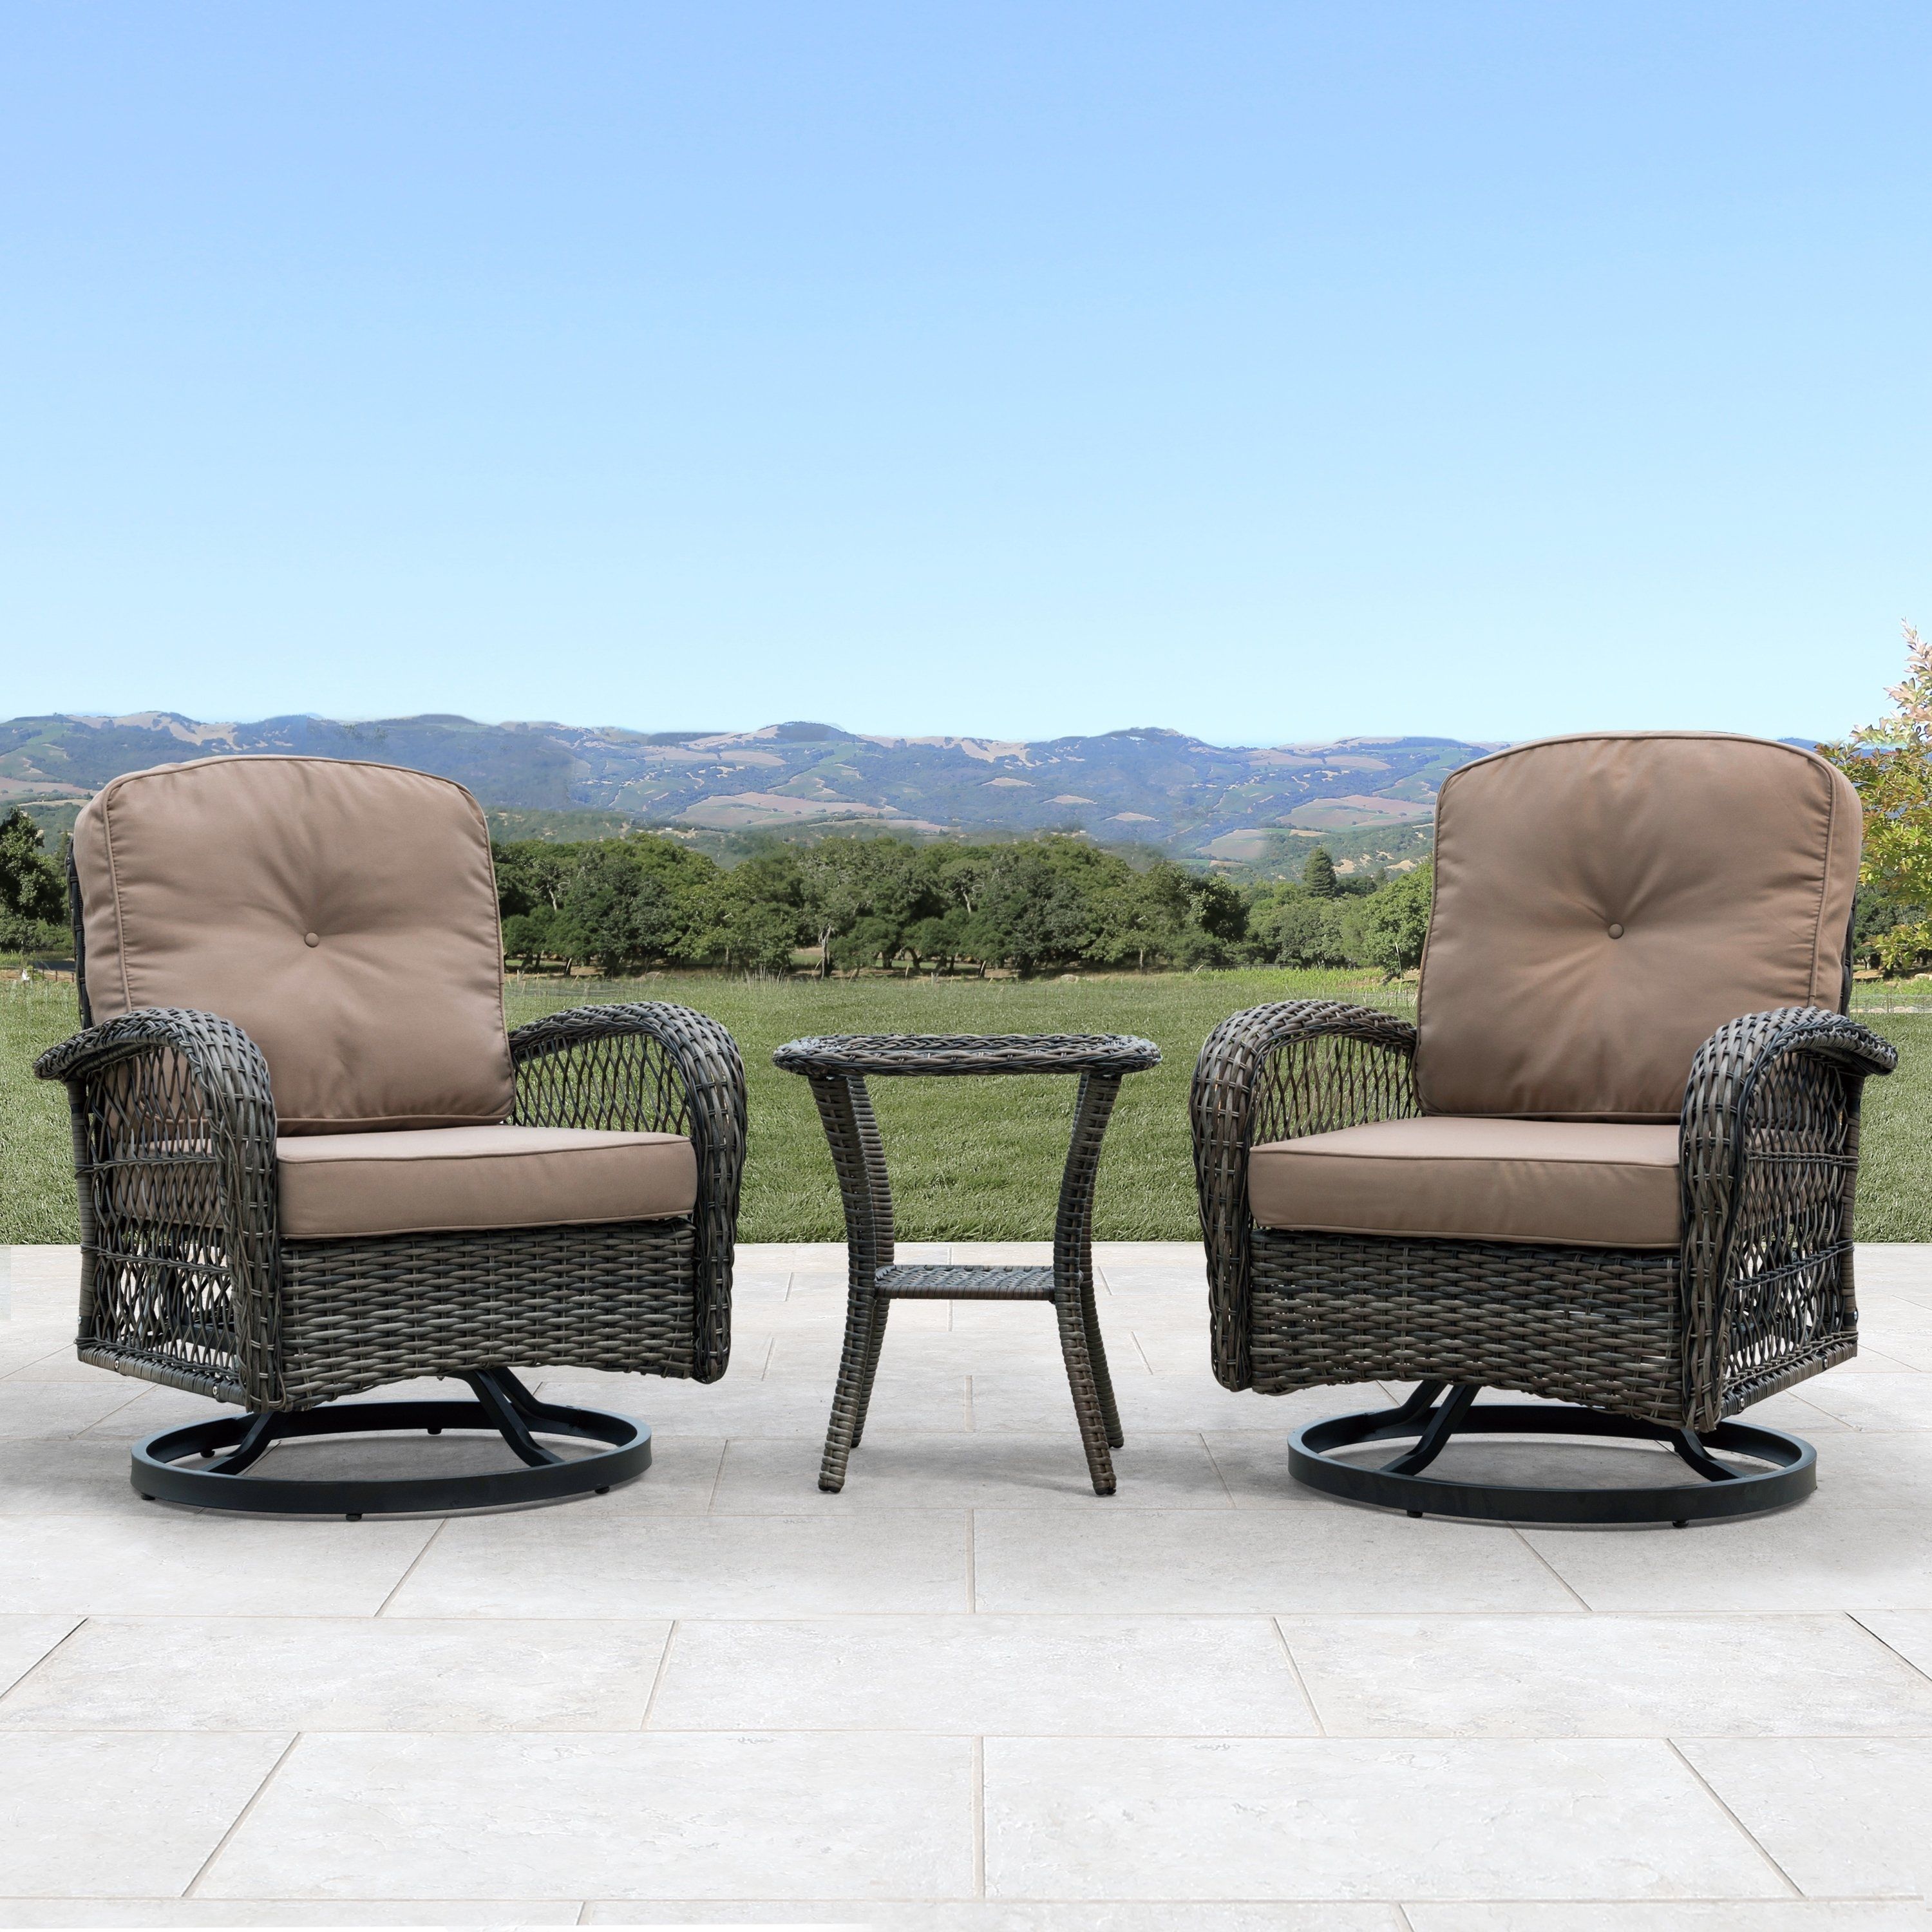 Buy 2 Outdoor Sofas, Chairs & Sectionals Online At Overstock With Regard To Alder Grande Ii Swivel Chairs (View 10 of 25)